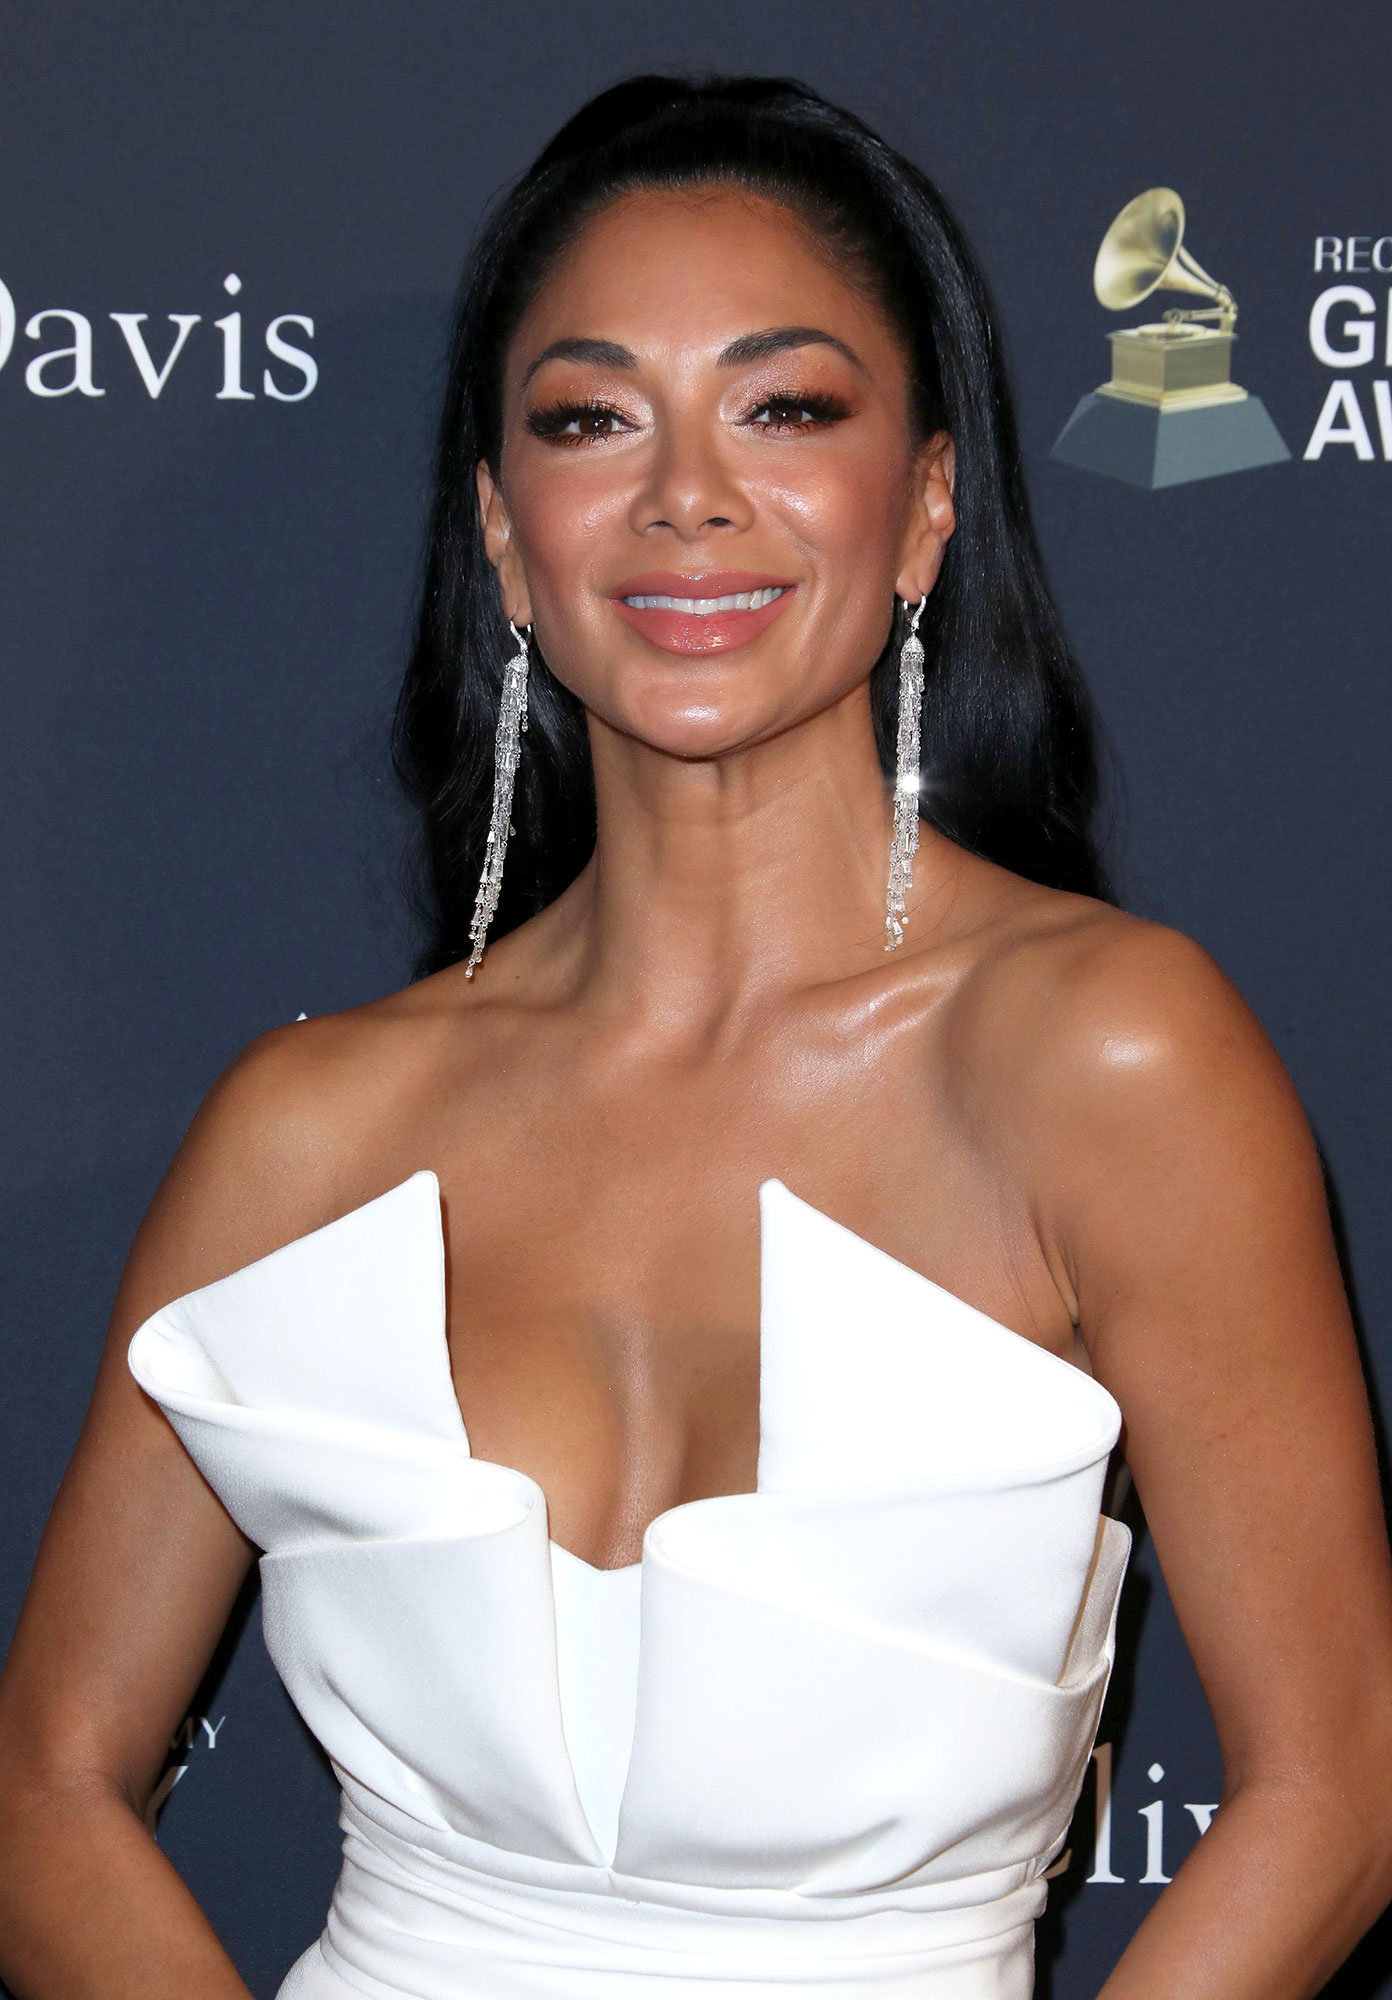 Nicole Scherzinger DWTS Dancing With The Stars Contestants With Prior Dancing Experience